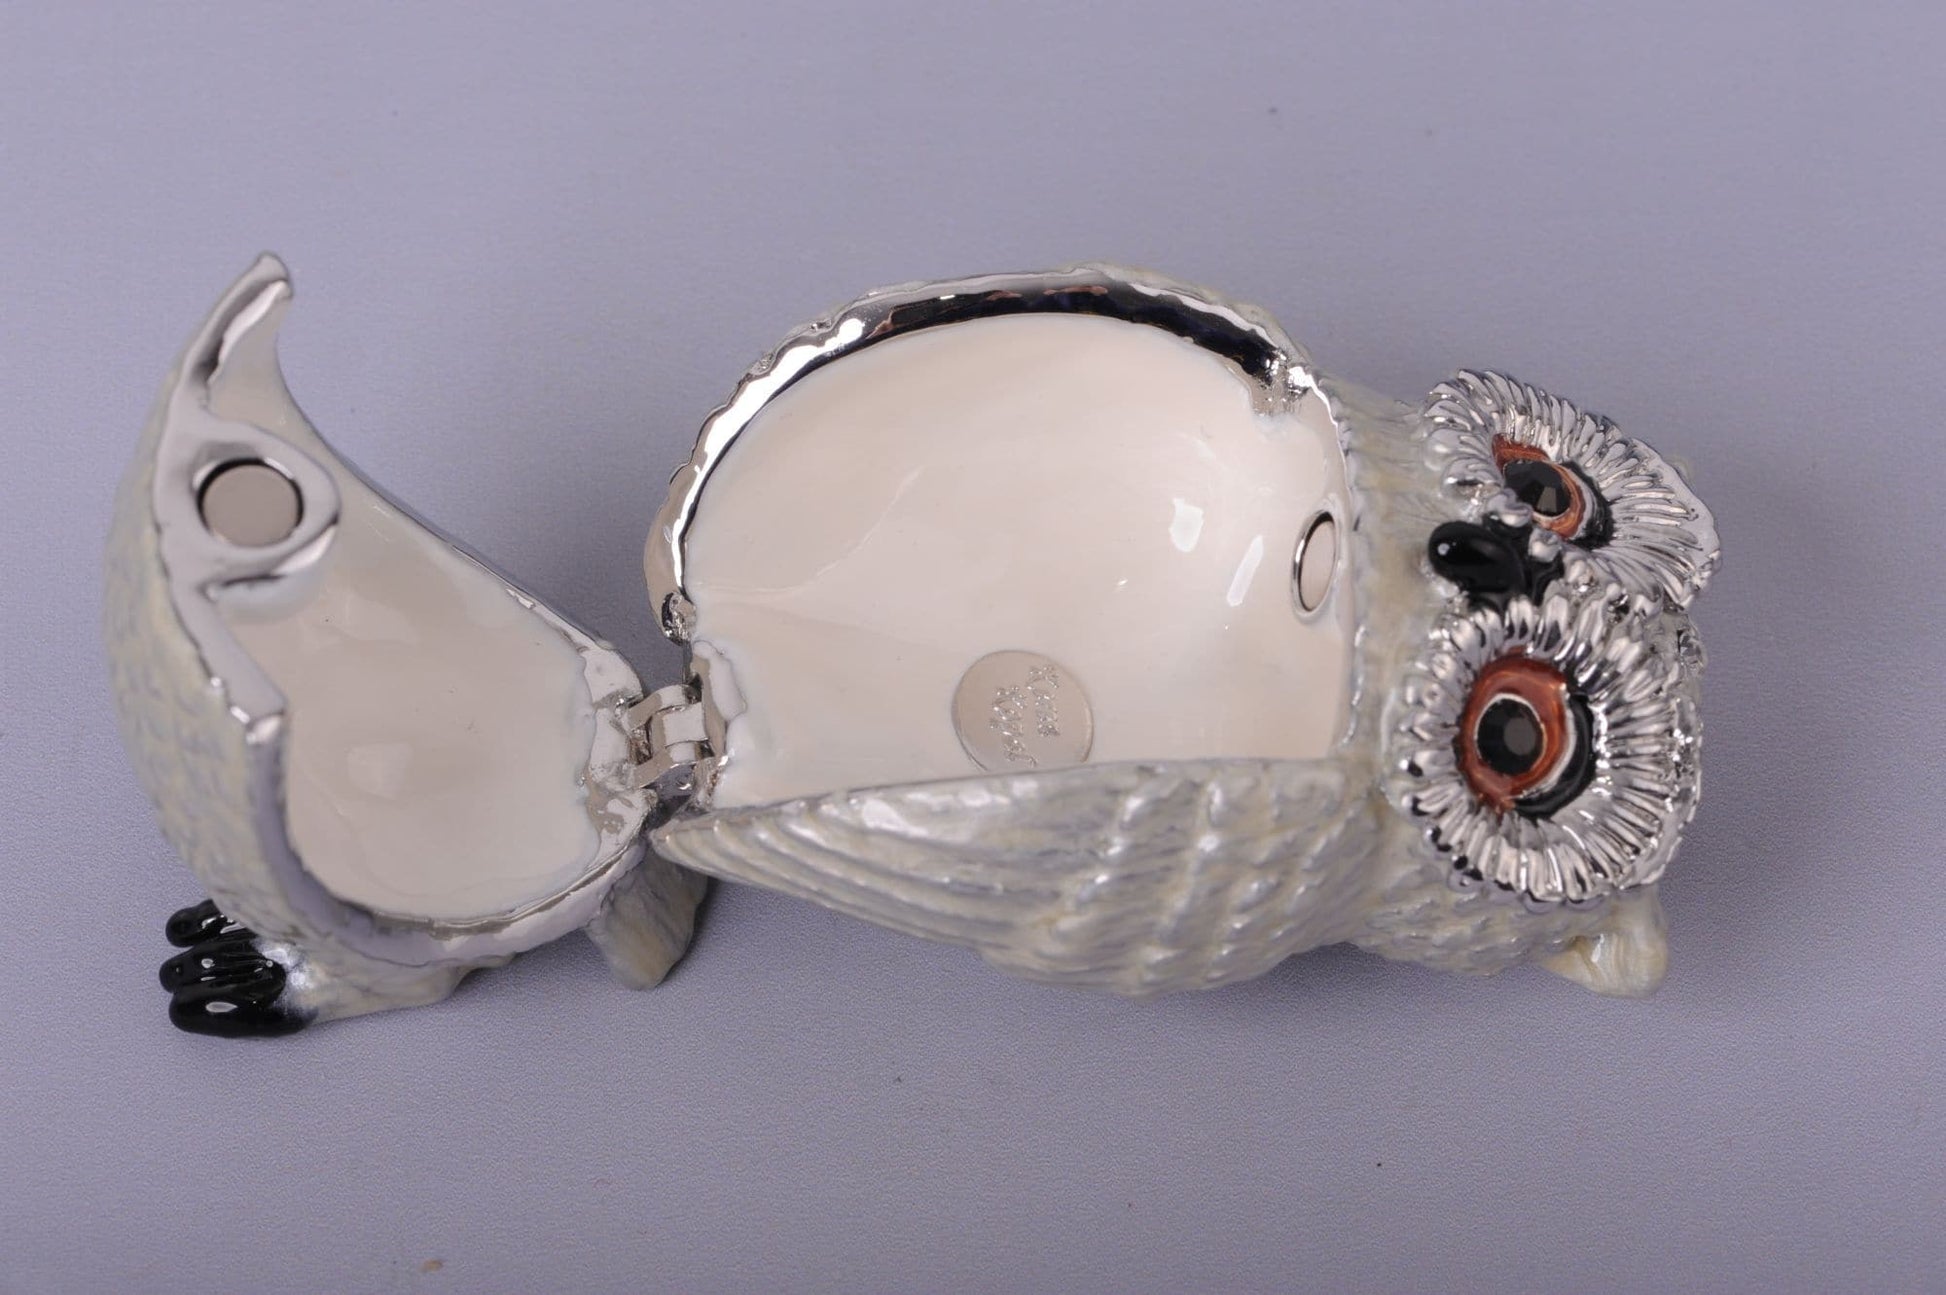 Silver and White Owl | Treasures of my HeART